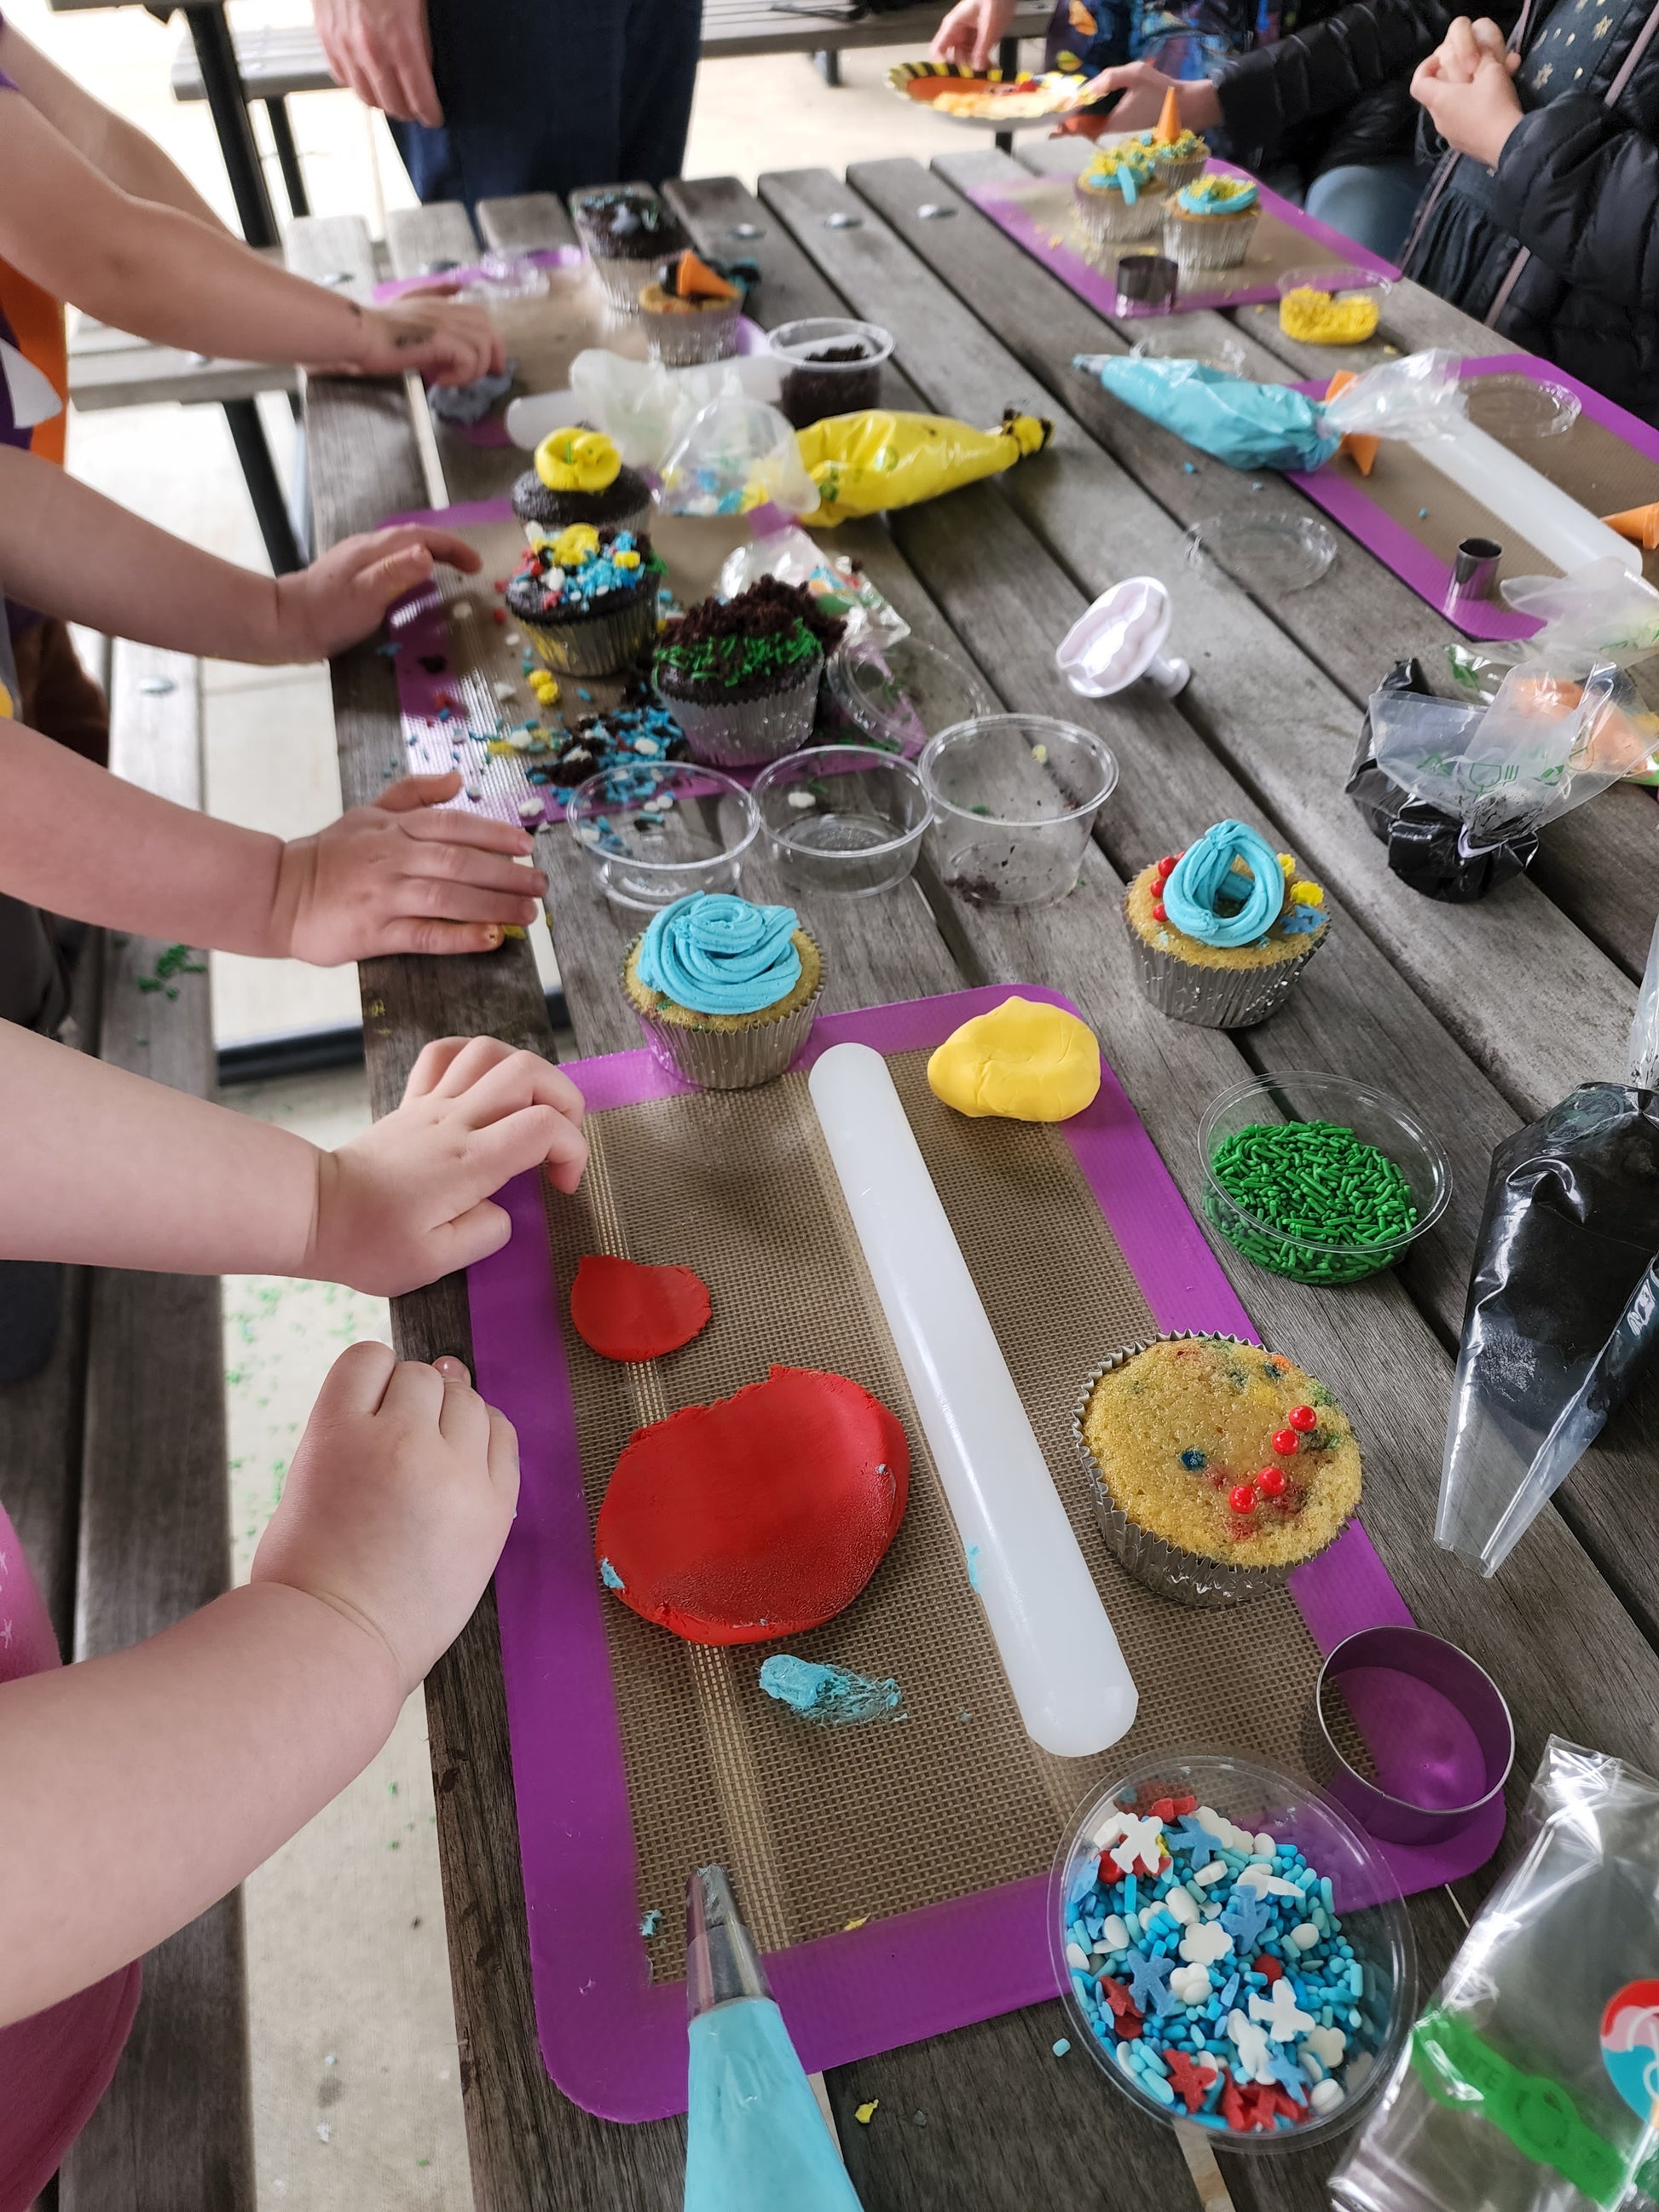 The scene of active little hands decorating cupcakes at a custom cake party in the Portland area. A picnic table is topped with a smattering of cupcake-decorating ingredients and tools, like fondant, rollers, cutters, frosting, sprinkles, and edible dirt.